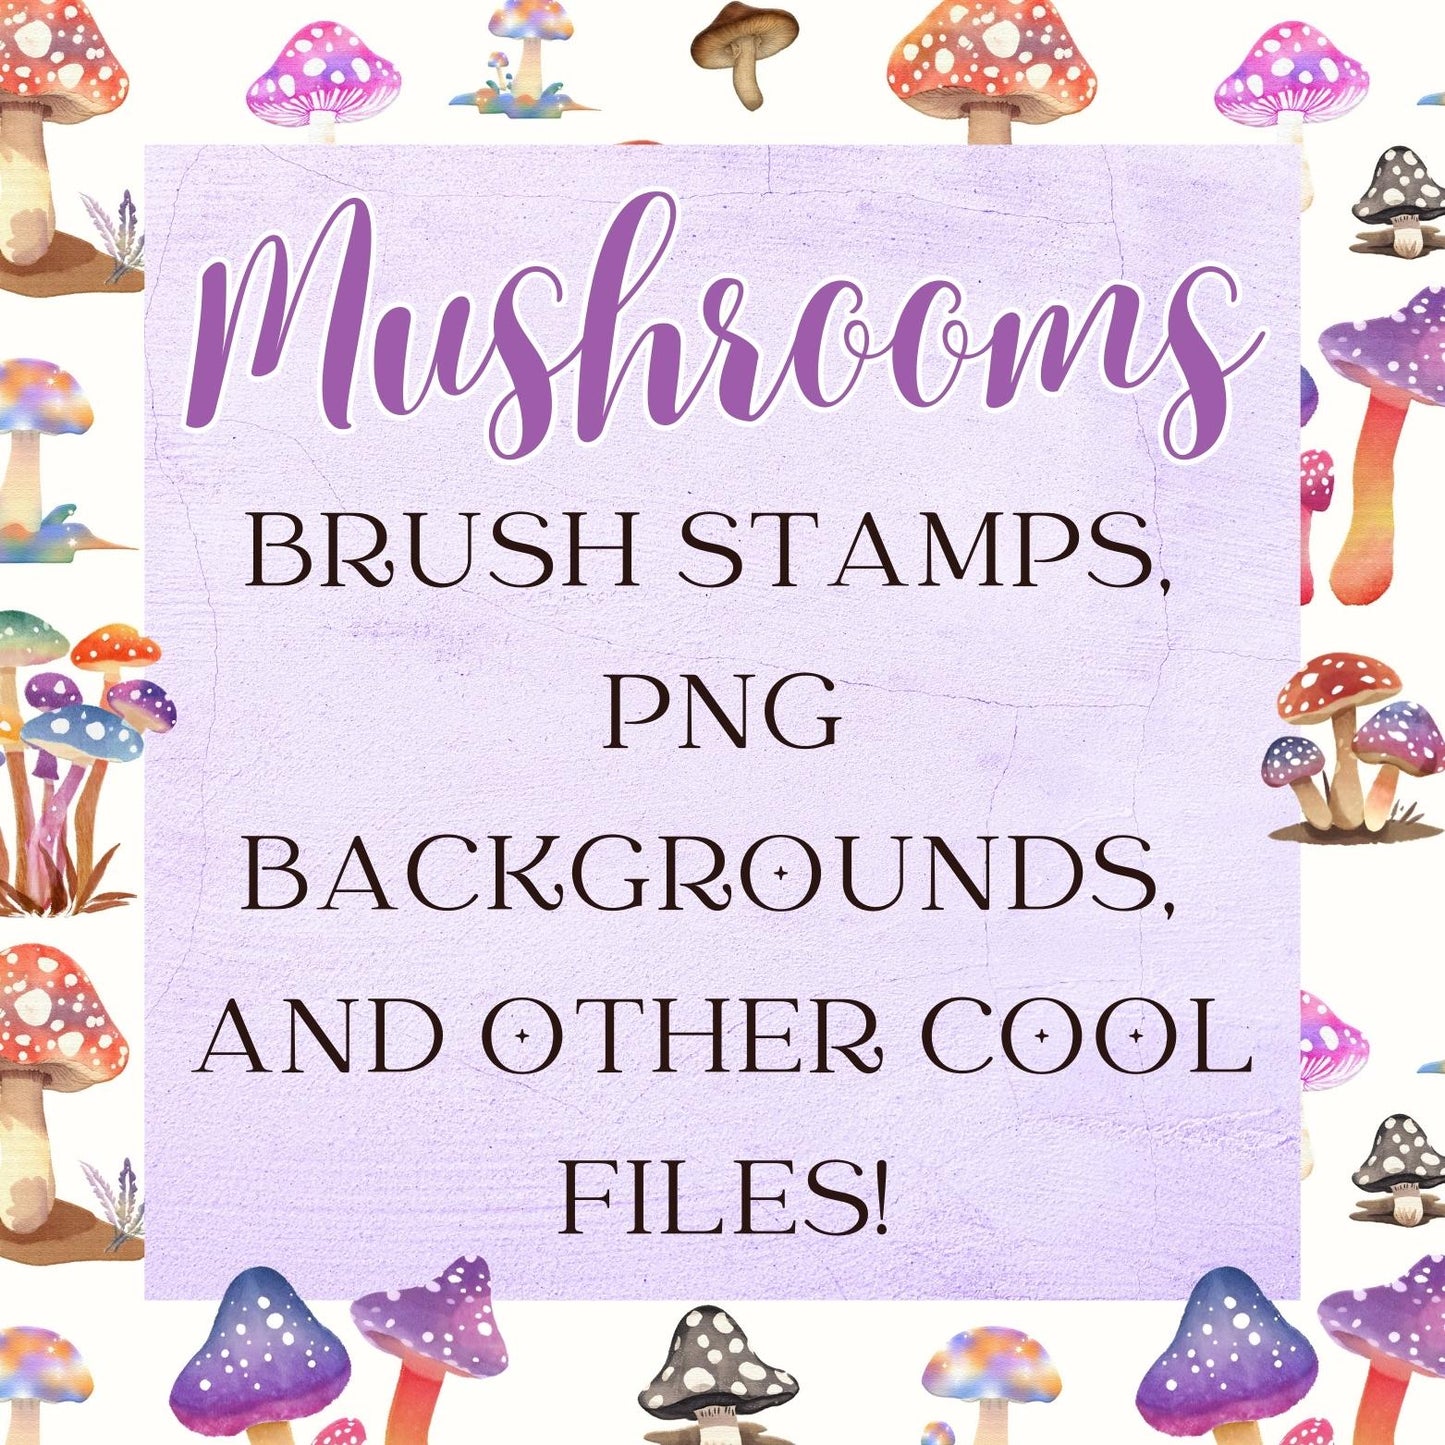 Mushroom Brushes and Stamps, PNG pack, Backgrounsd, and Bonus items!